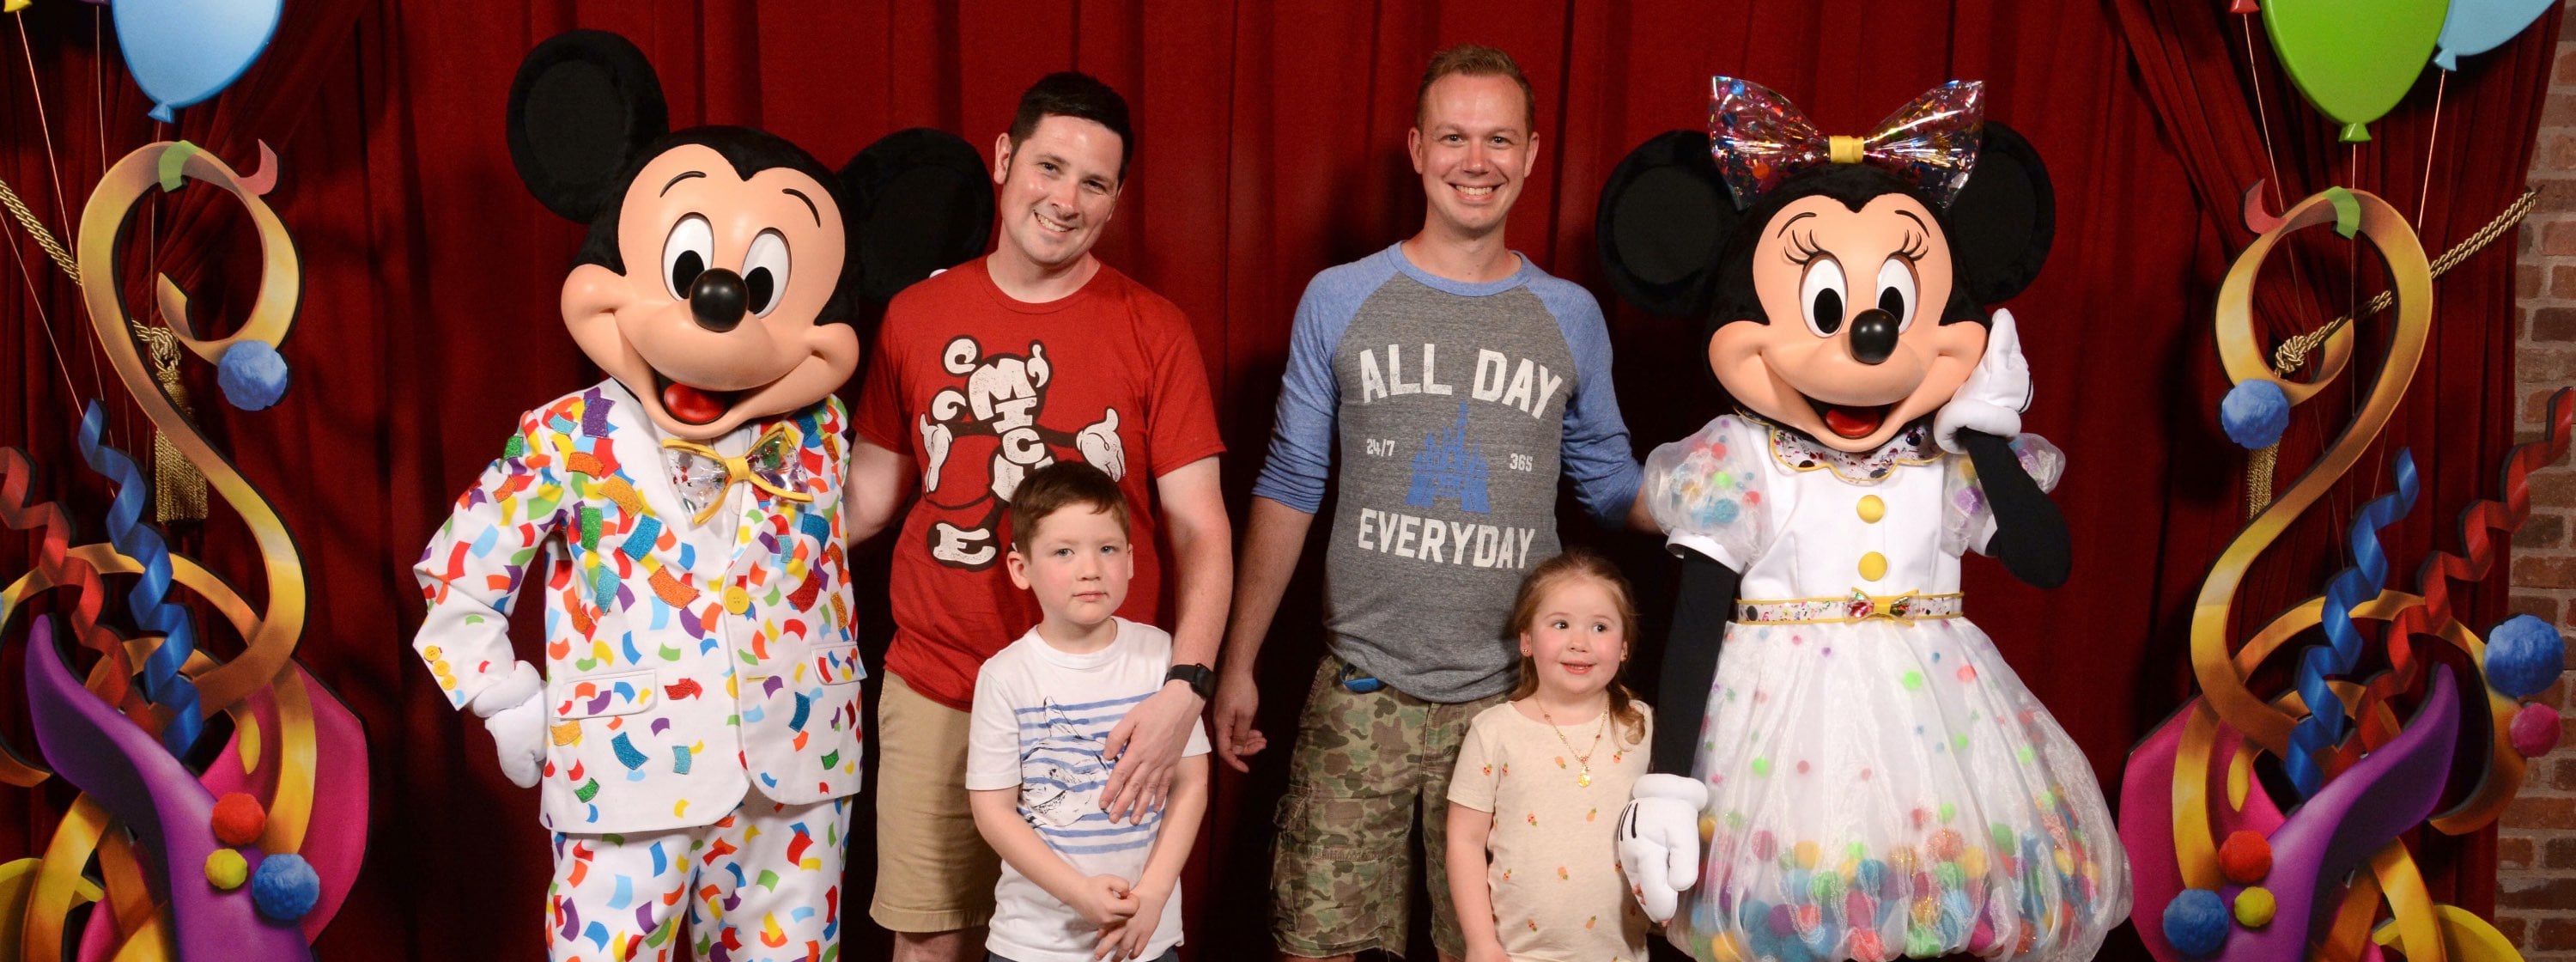 Scott and Chris with their family at Disney